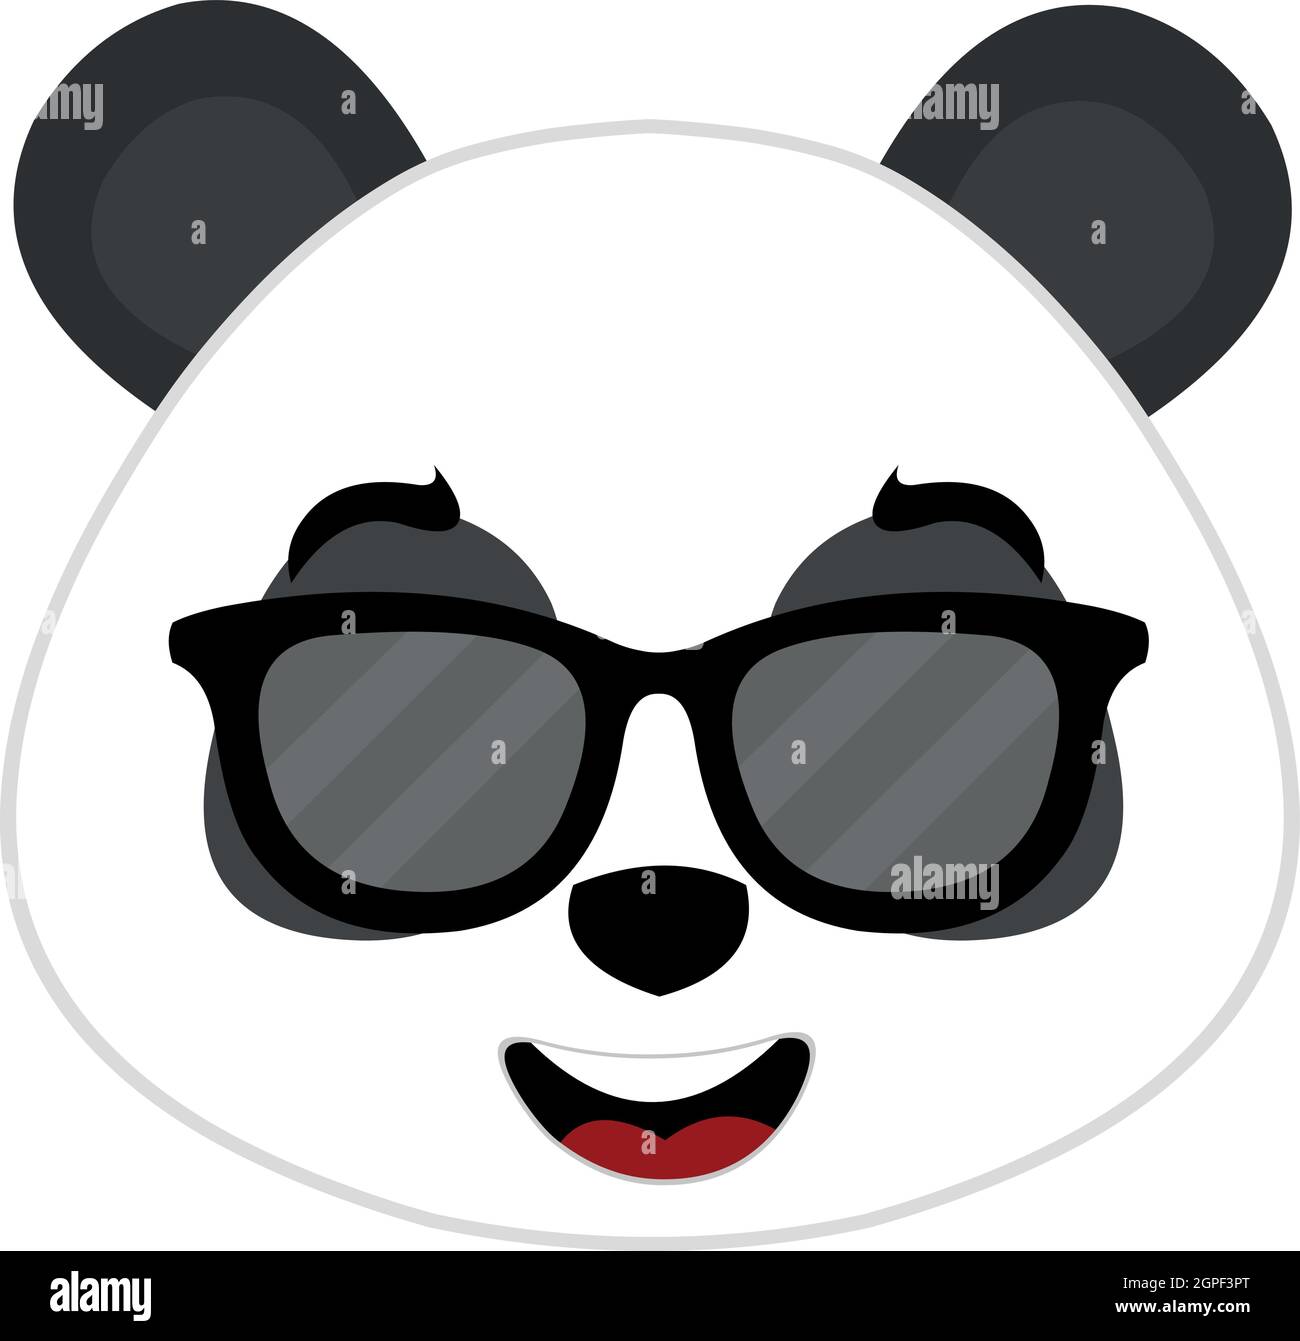 Vector illustration of emoticon of the face of a cartoon panda bear with sunglasses Stock Vector